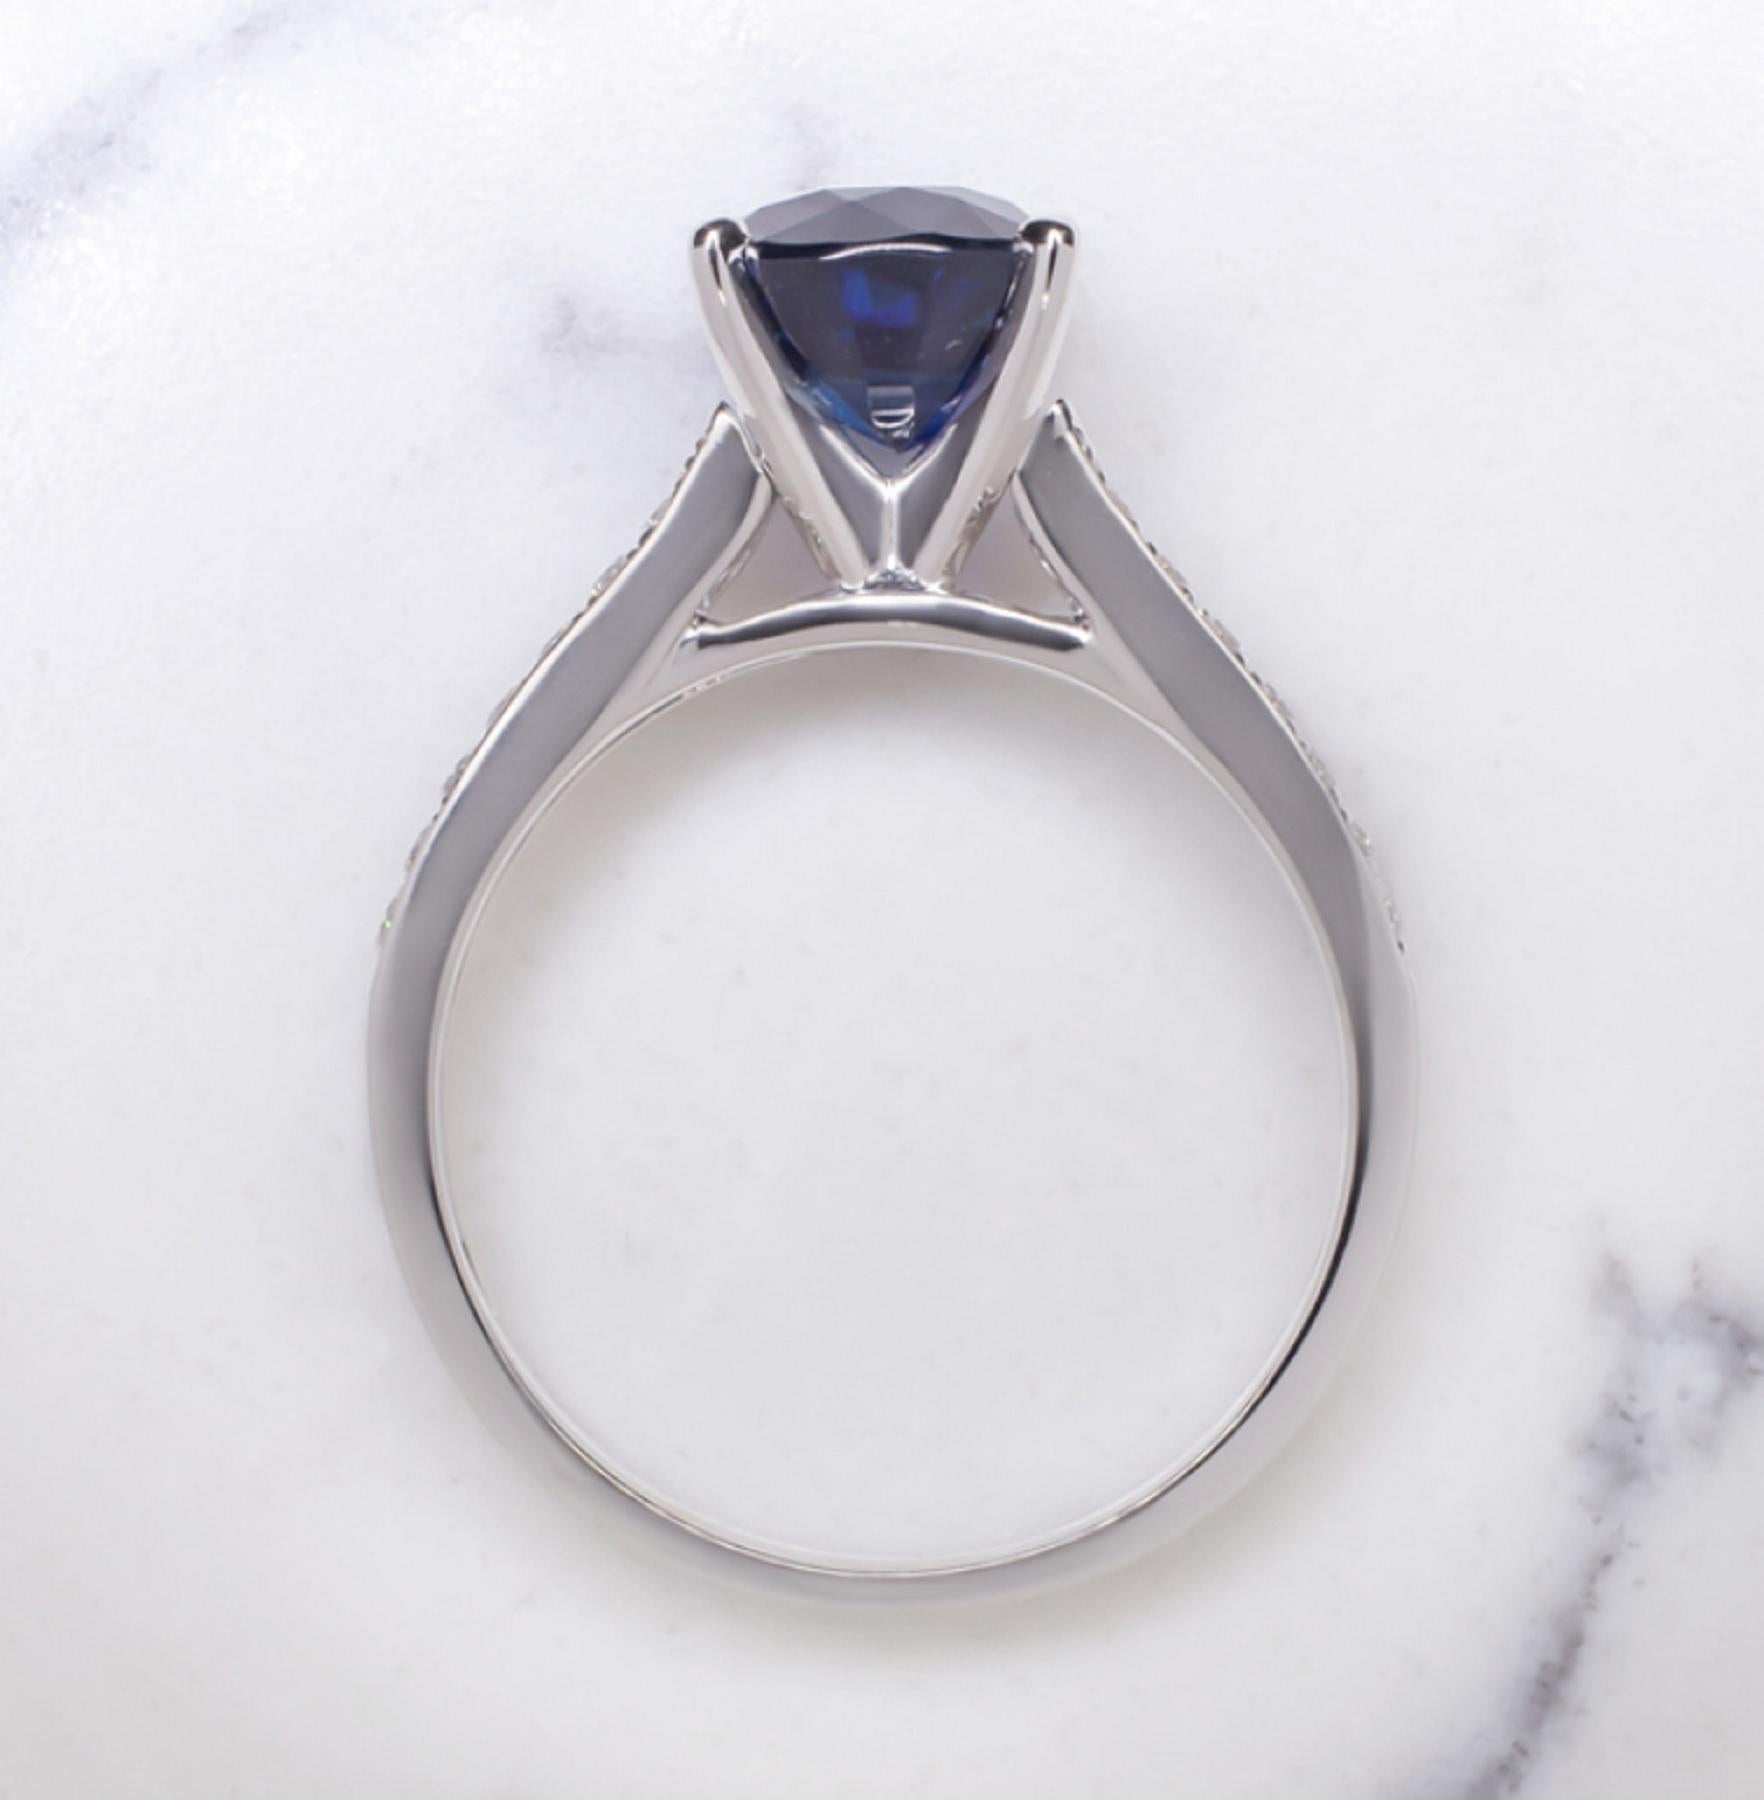 The 3.55 emerald cut sapphire ring is a gorgeous royal blue color. It is a beautiful true blue that is perfectly set off by the diamond accents. The shoulders of the elegant and luxuriously substantial setting glitter with two rows of diamonds for a